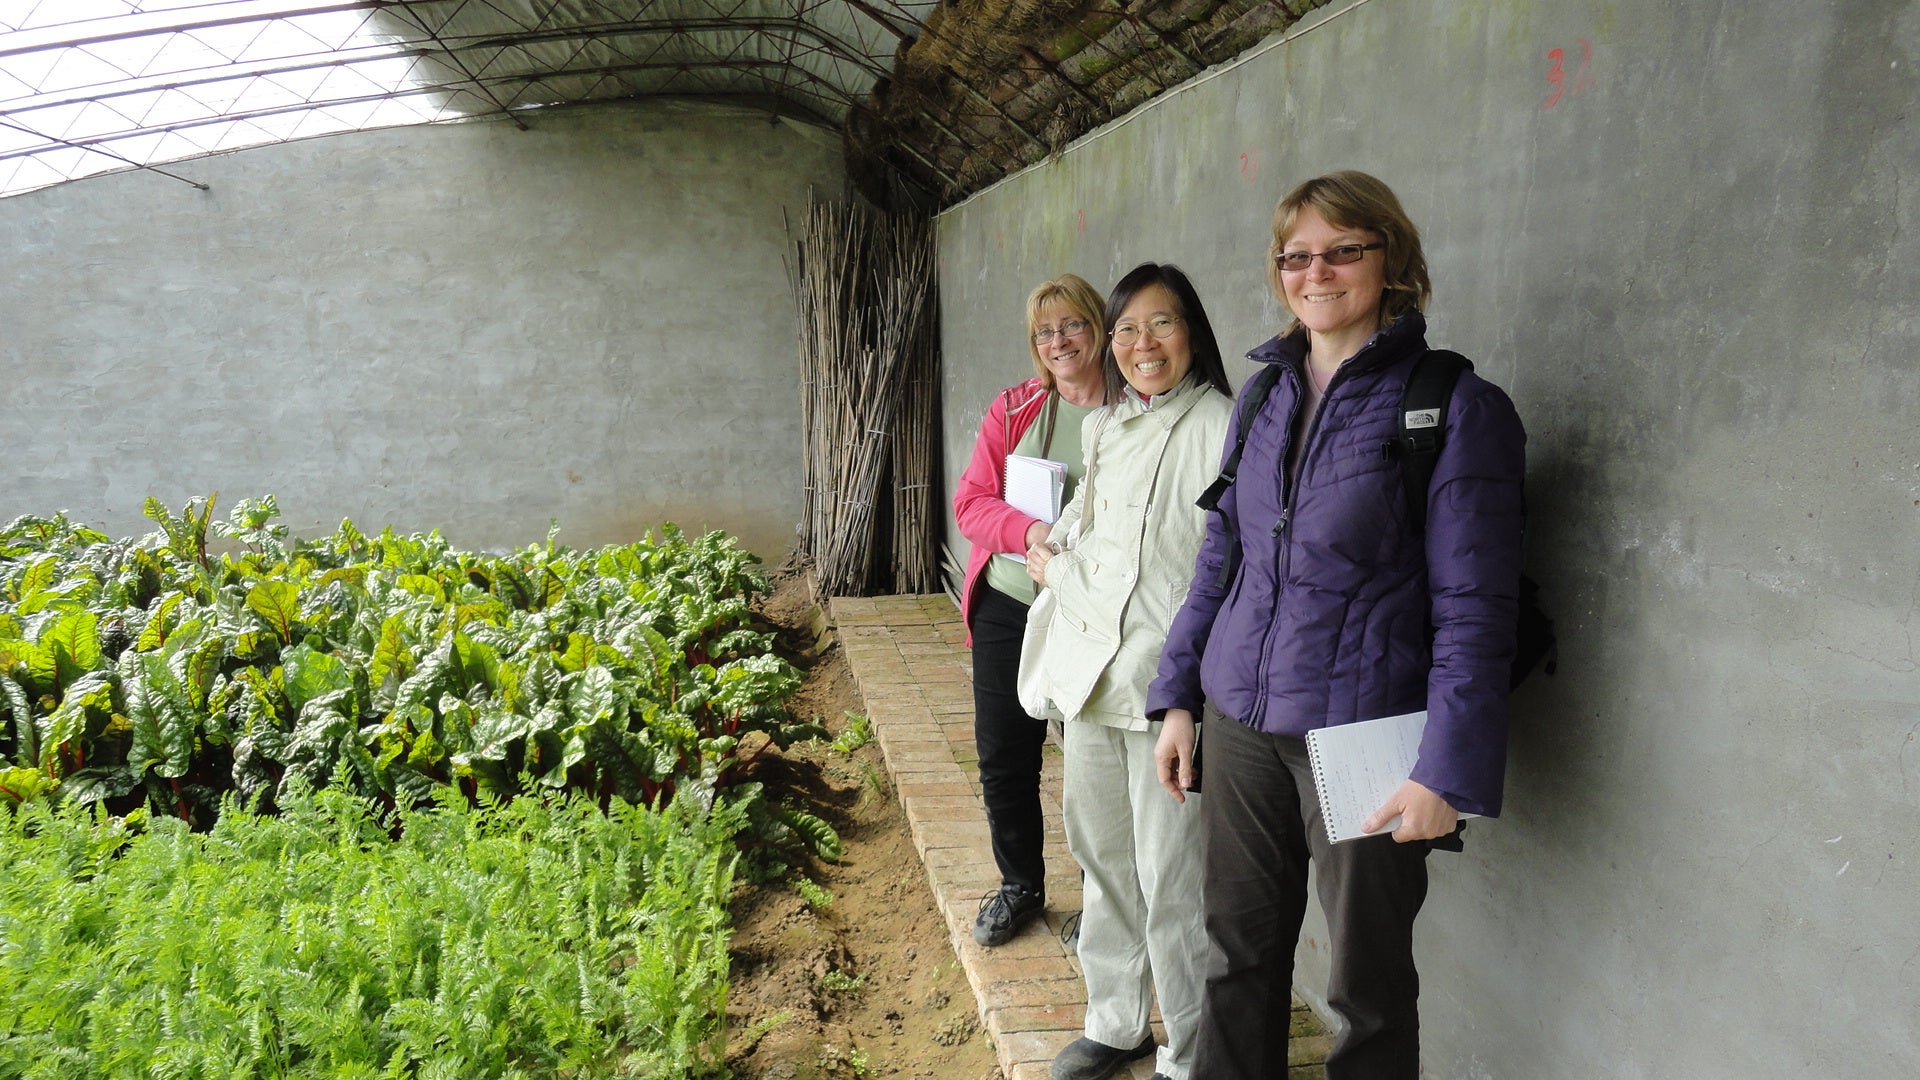 Steffanie, Lejen Chen and Theresa at Green Cow Farm in Beijing